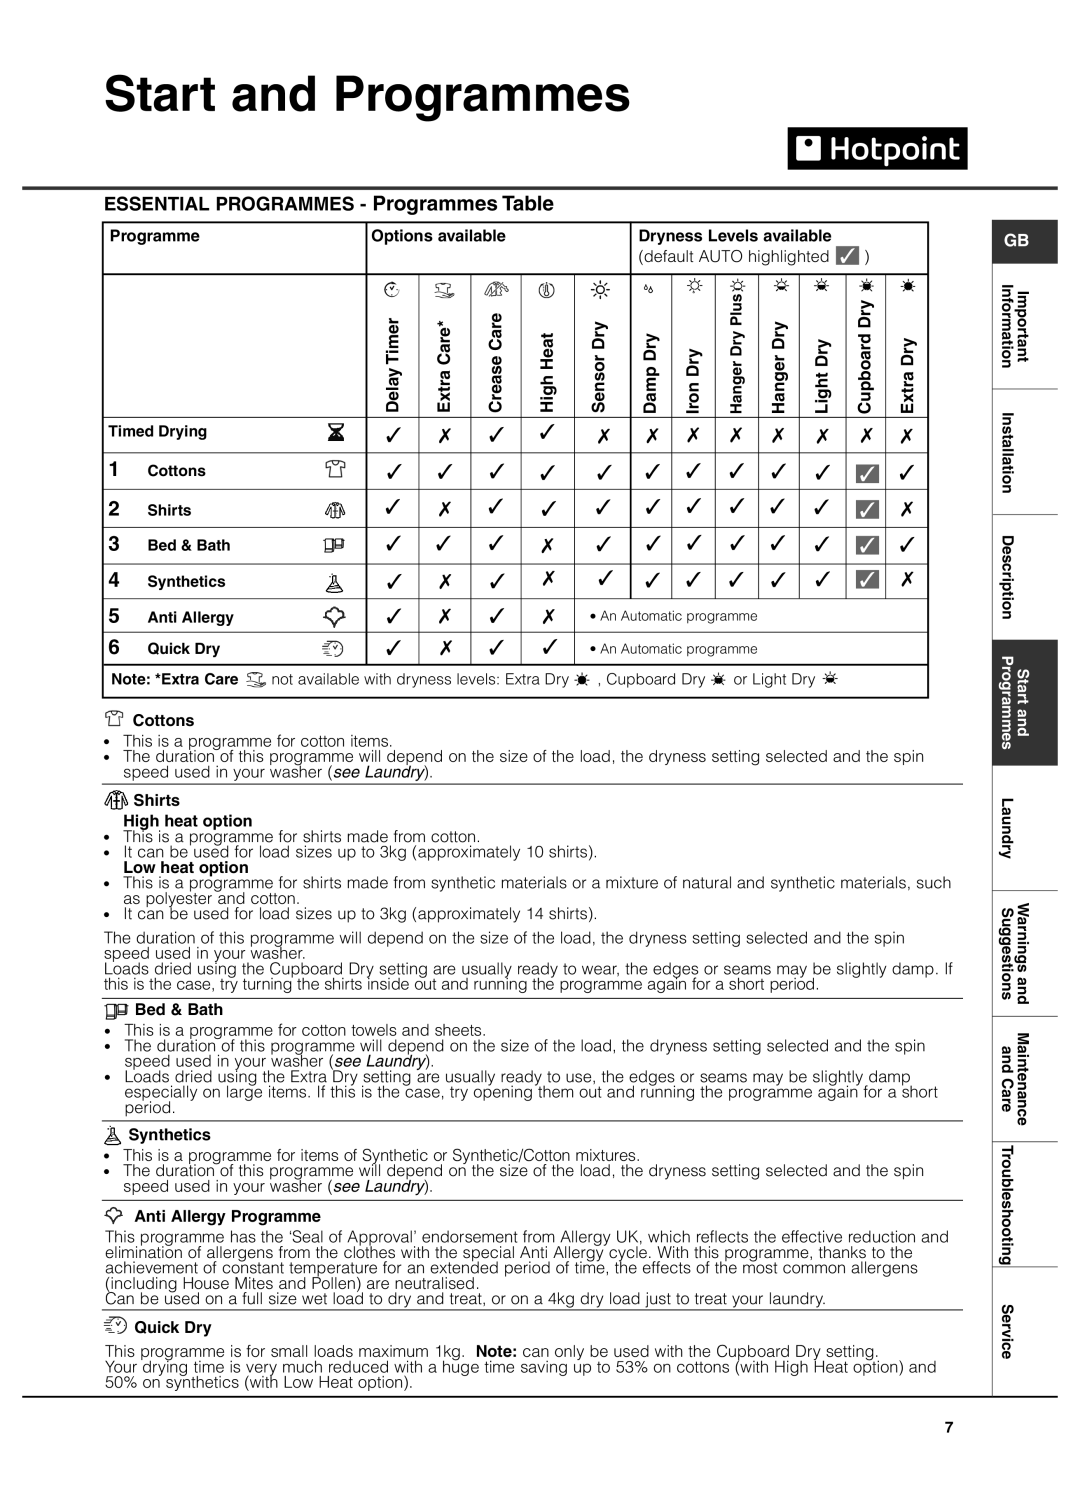 Hotpoint TCEl 87B Experience manual Start and Programmes, ESSENTIAL PROGRAMMES - Programmes Table 